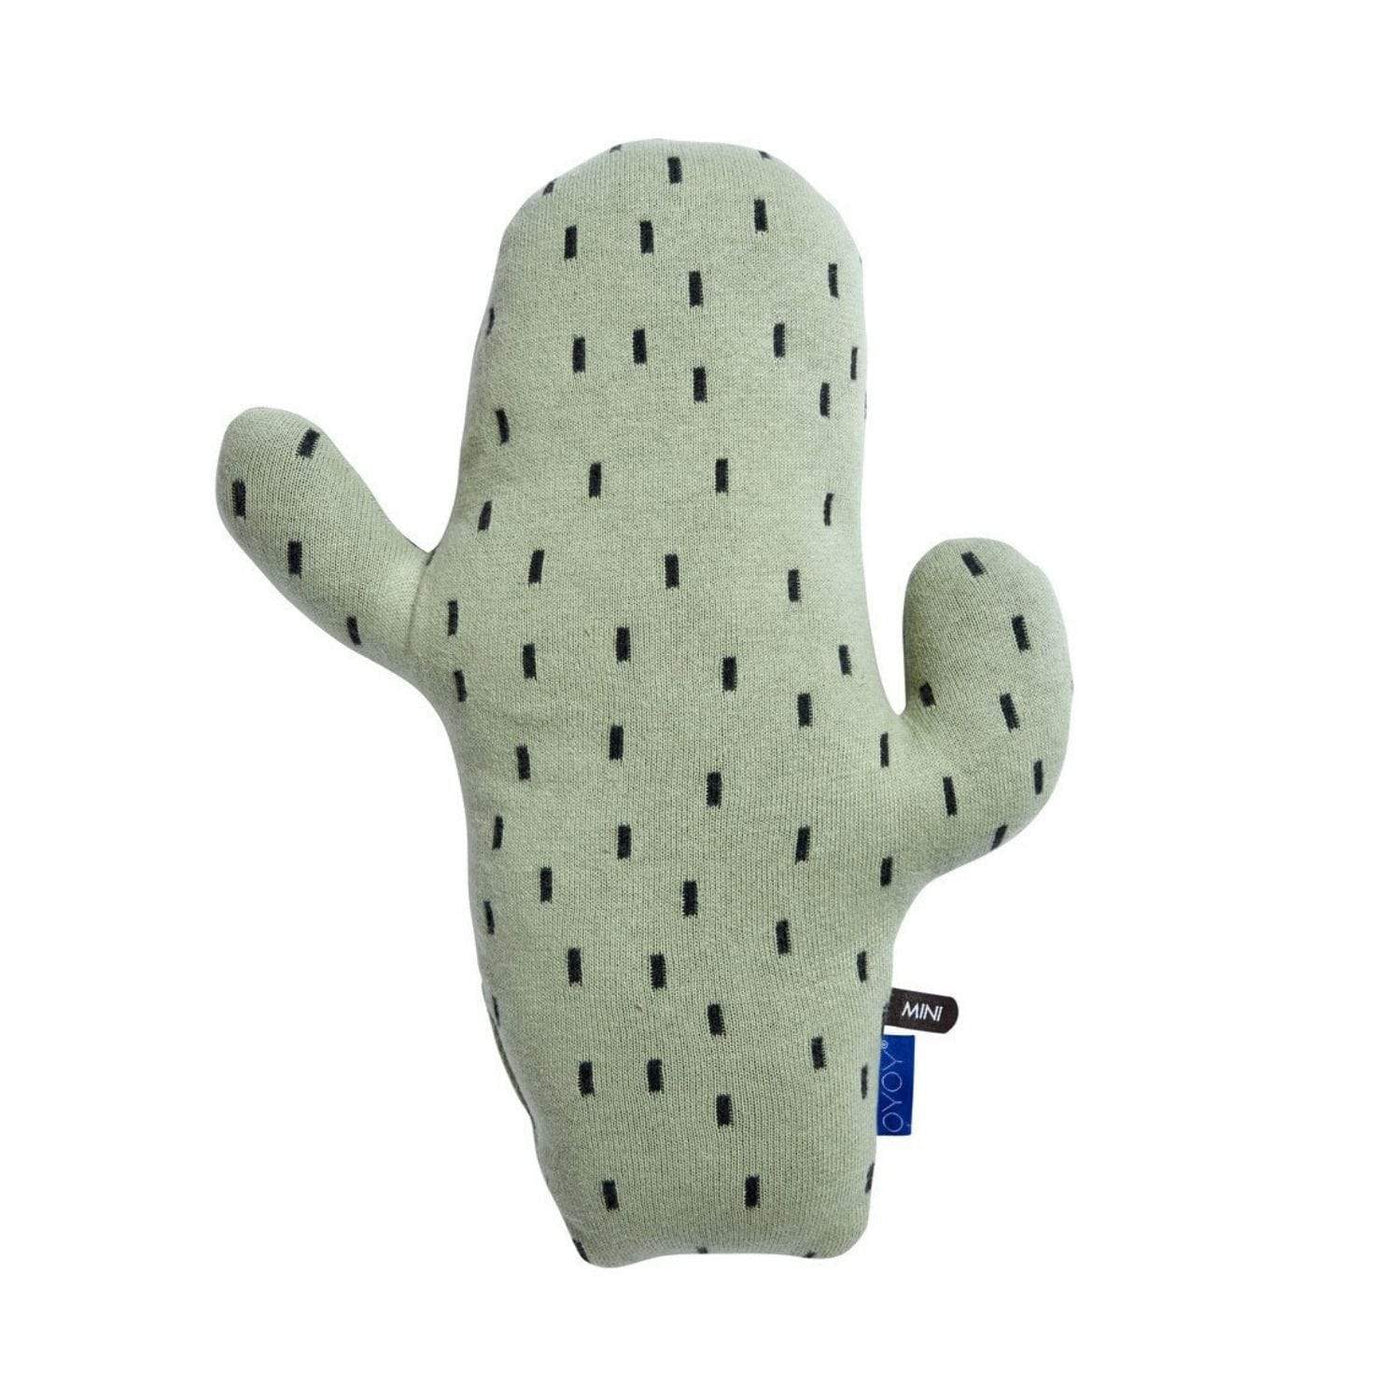 the fun and quirky cactus cushion by OYOY in pale mint with monochrome dash pattern detailing.